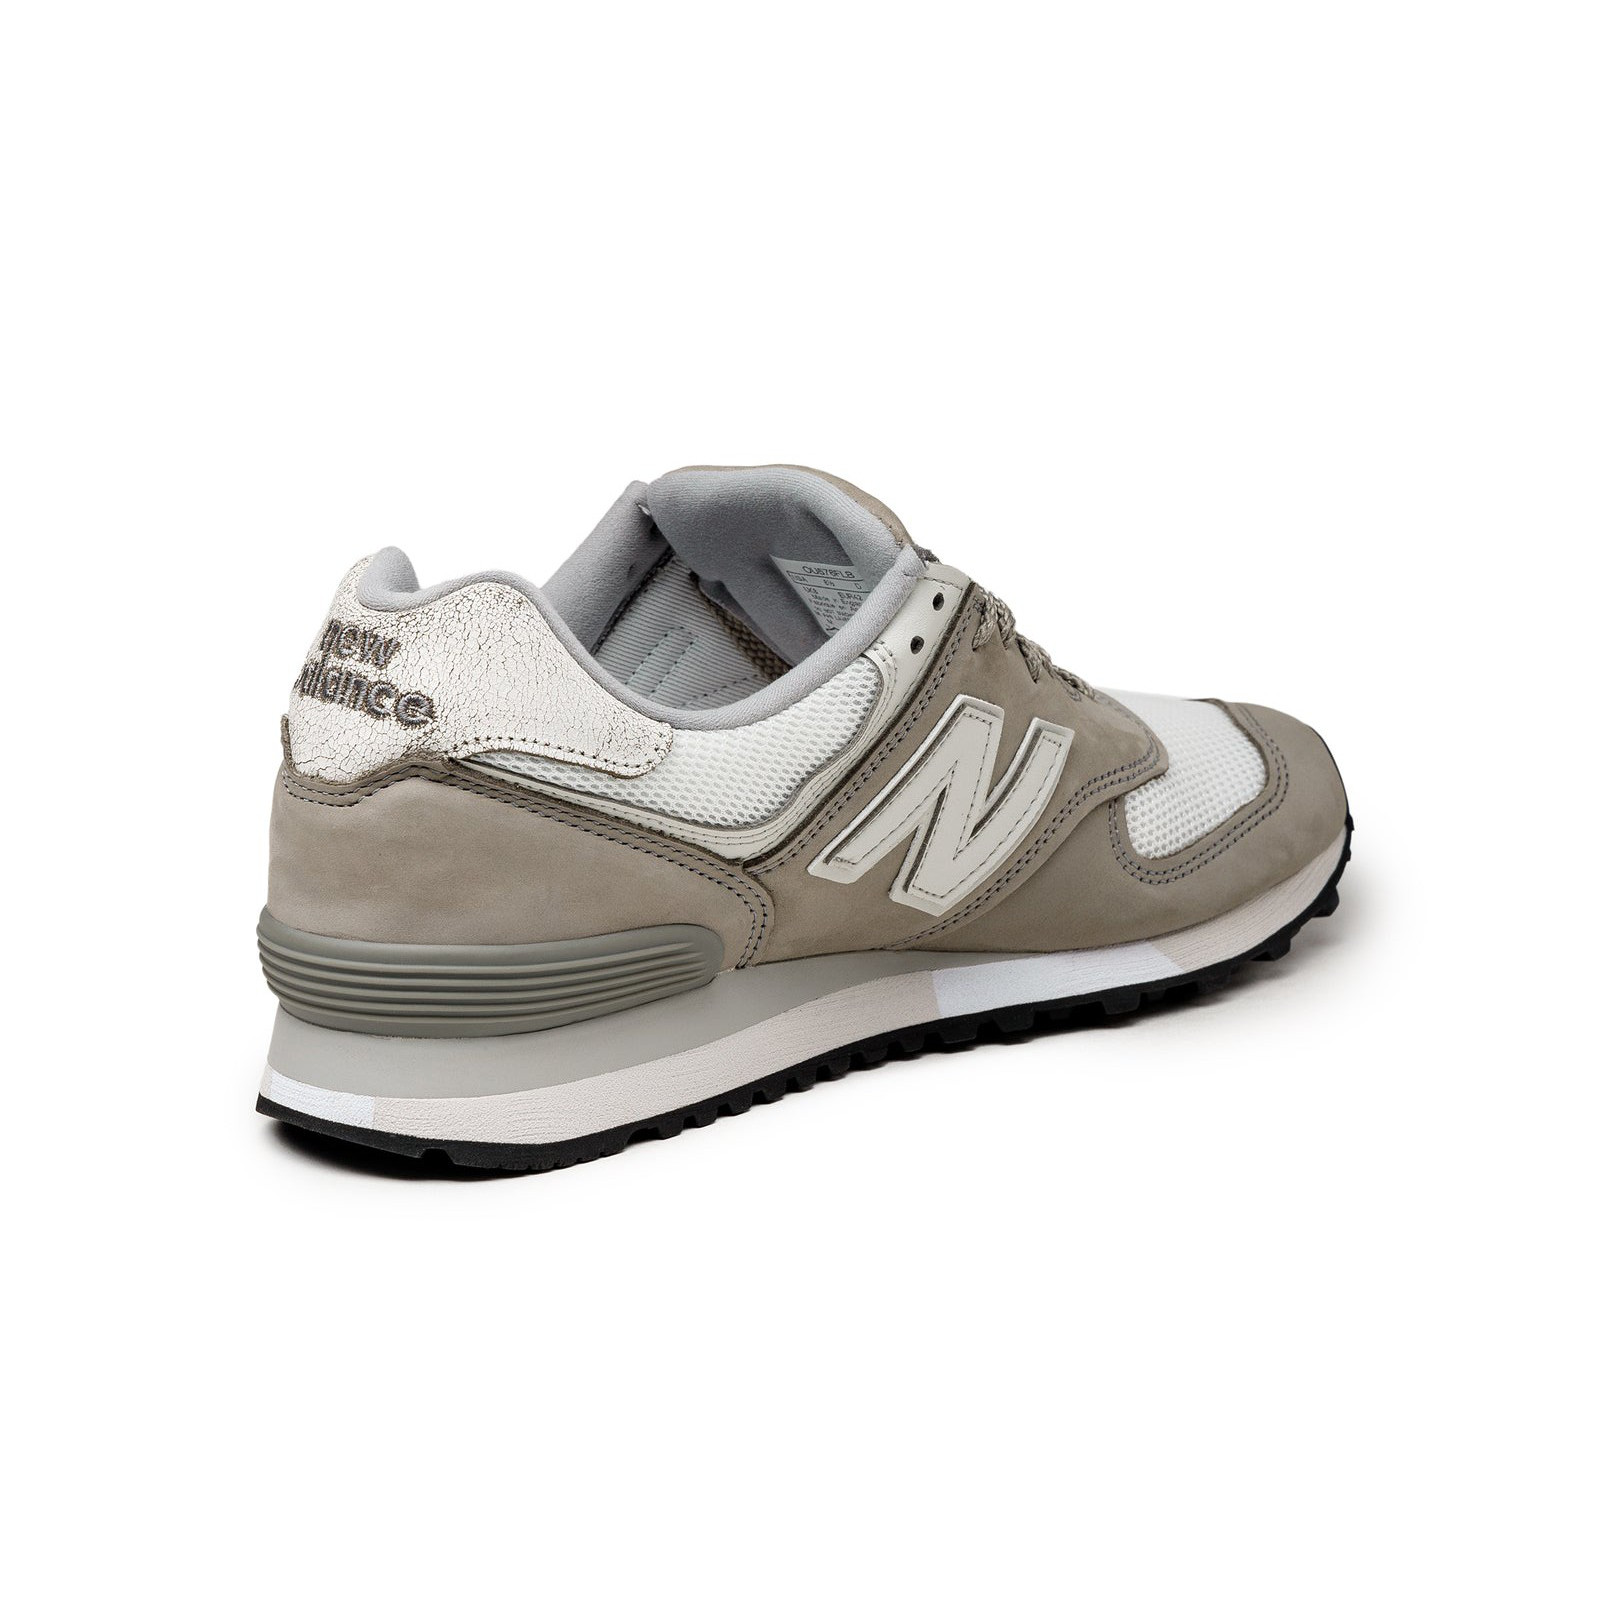 New Balance OU576FLB
Made in England
Flint Gray / Star White